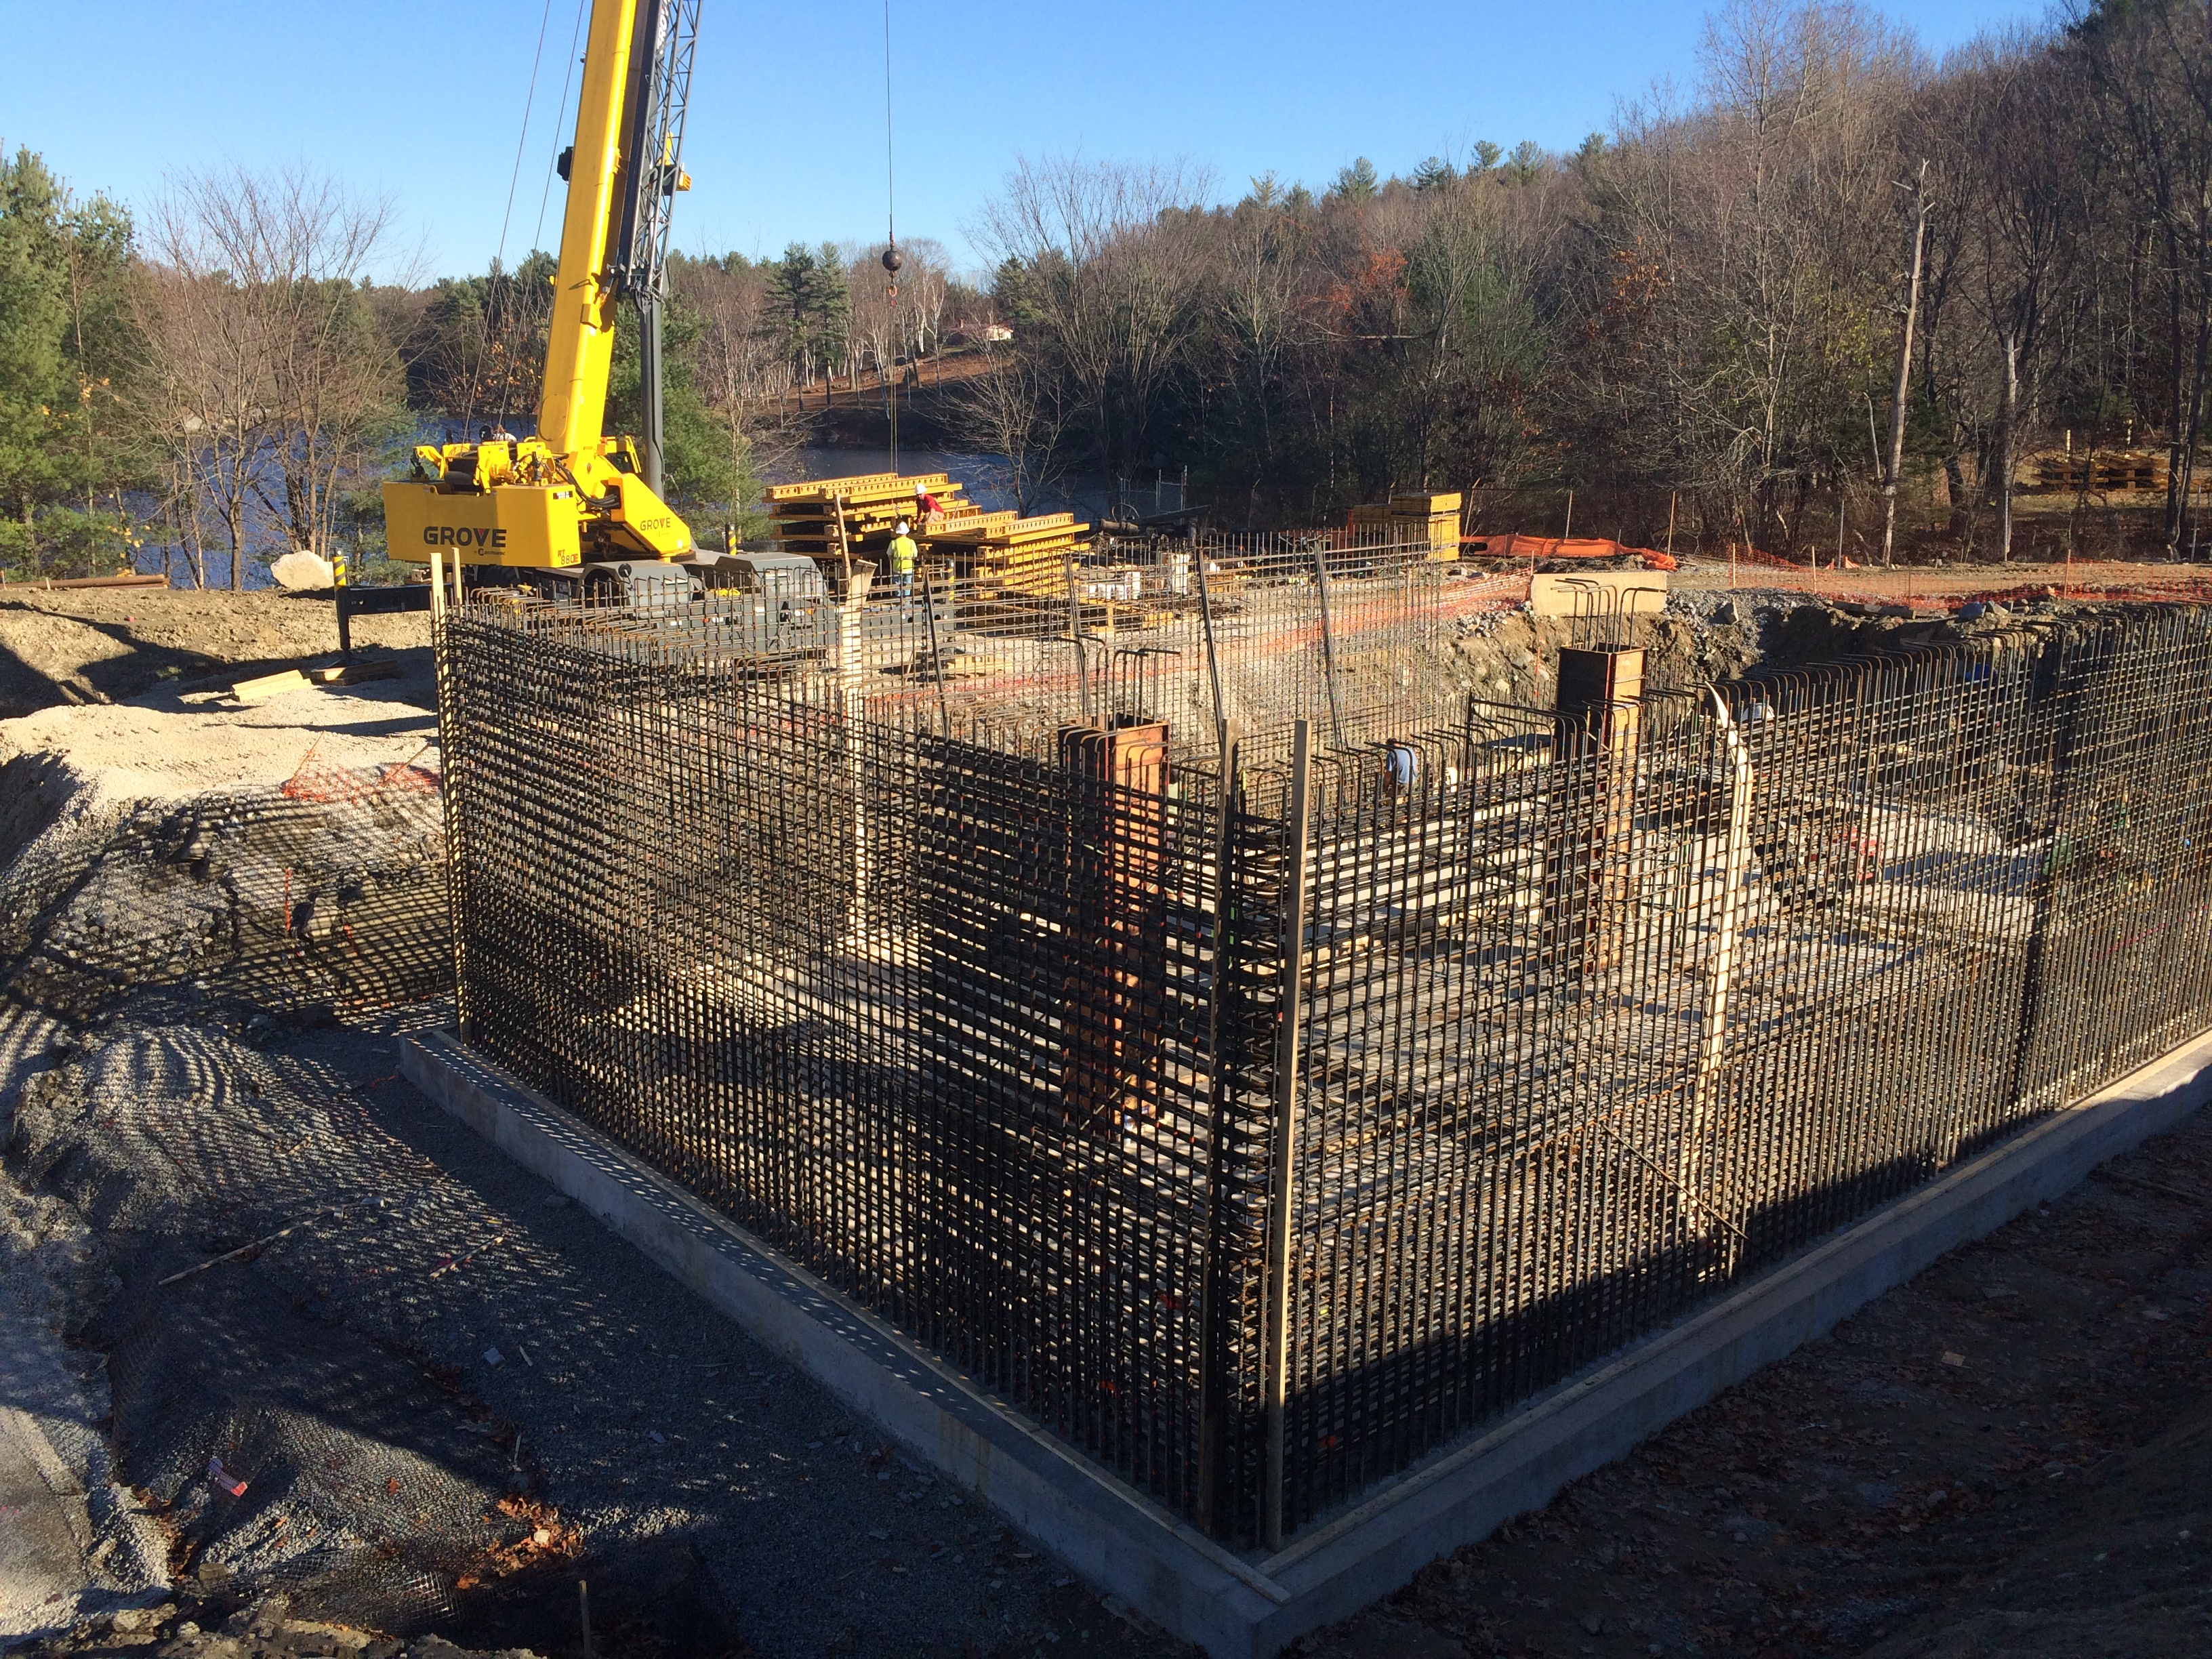 Part of the Newmarket wastewater treatment facility being constructed